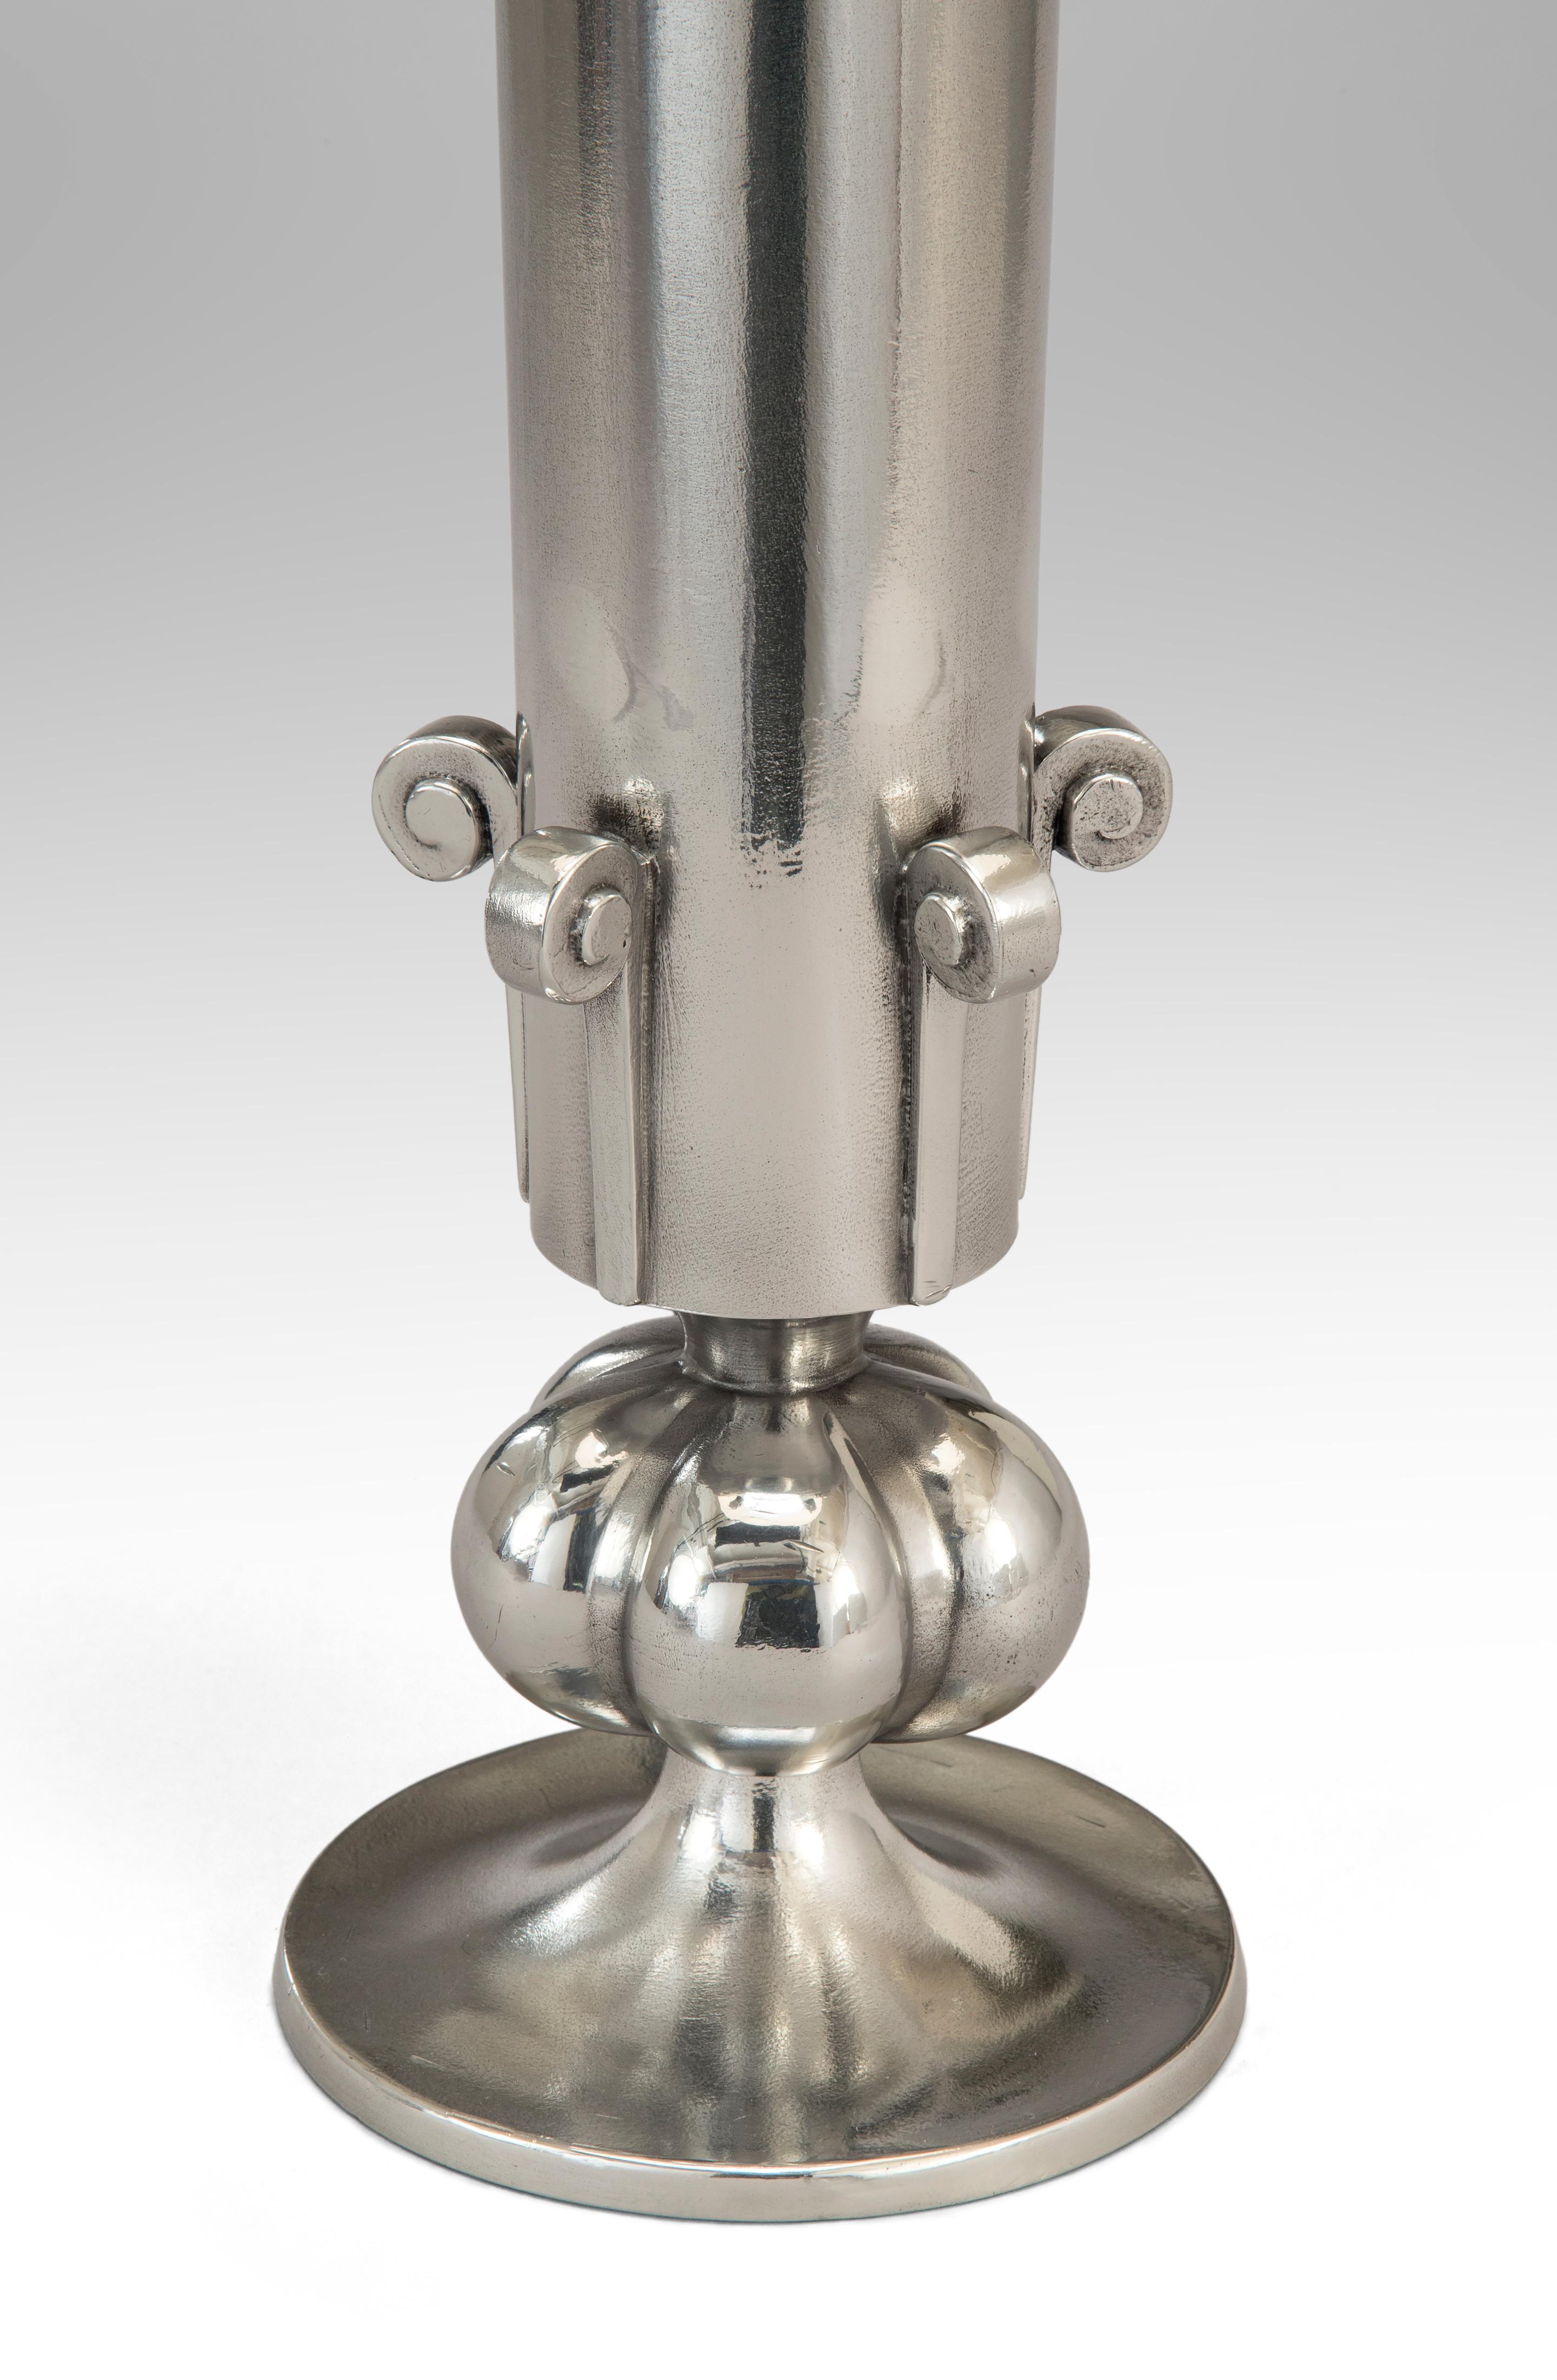 Swedish Grace period pewter lamp
Early 20th century
A strong and elegant design superbly executed. The flared tapering cylinder stem adorned with scrolls above a lobed sphere, on a circular base.
Designers mark: OLLERS
Schreuder & Olsson mark: